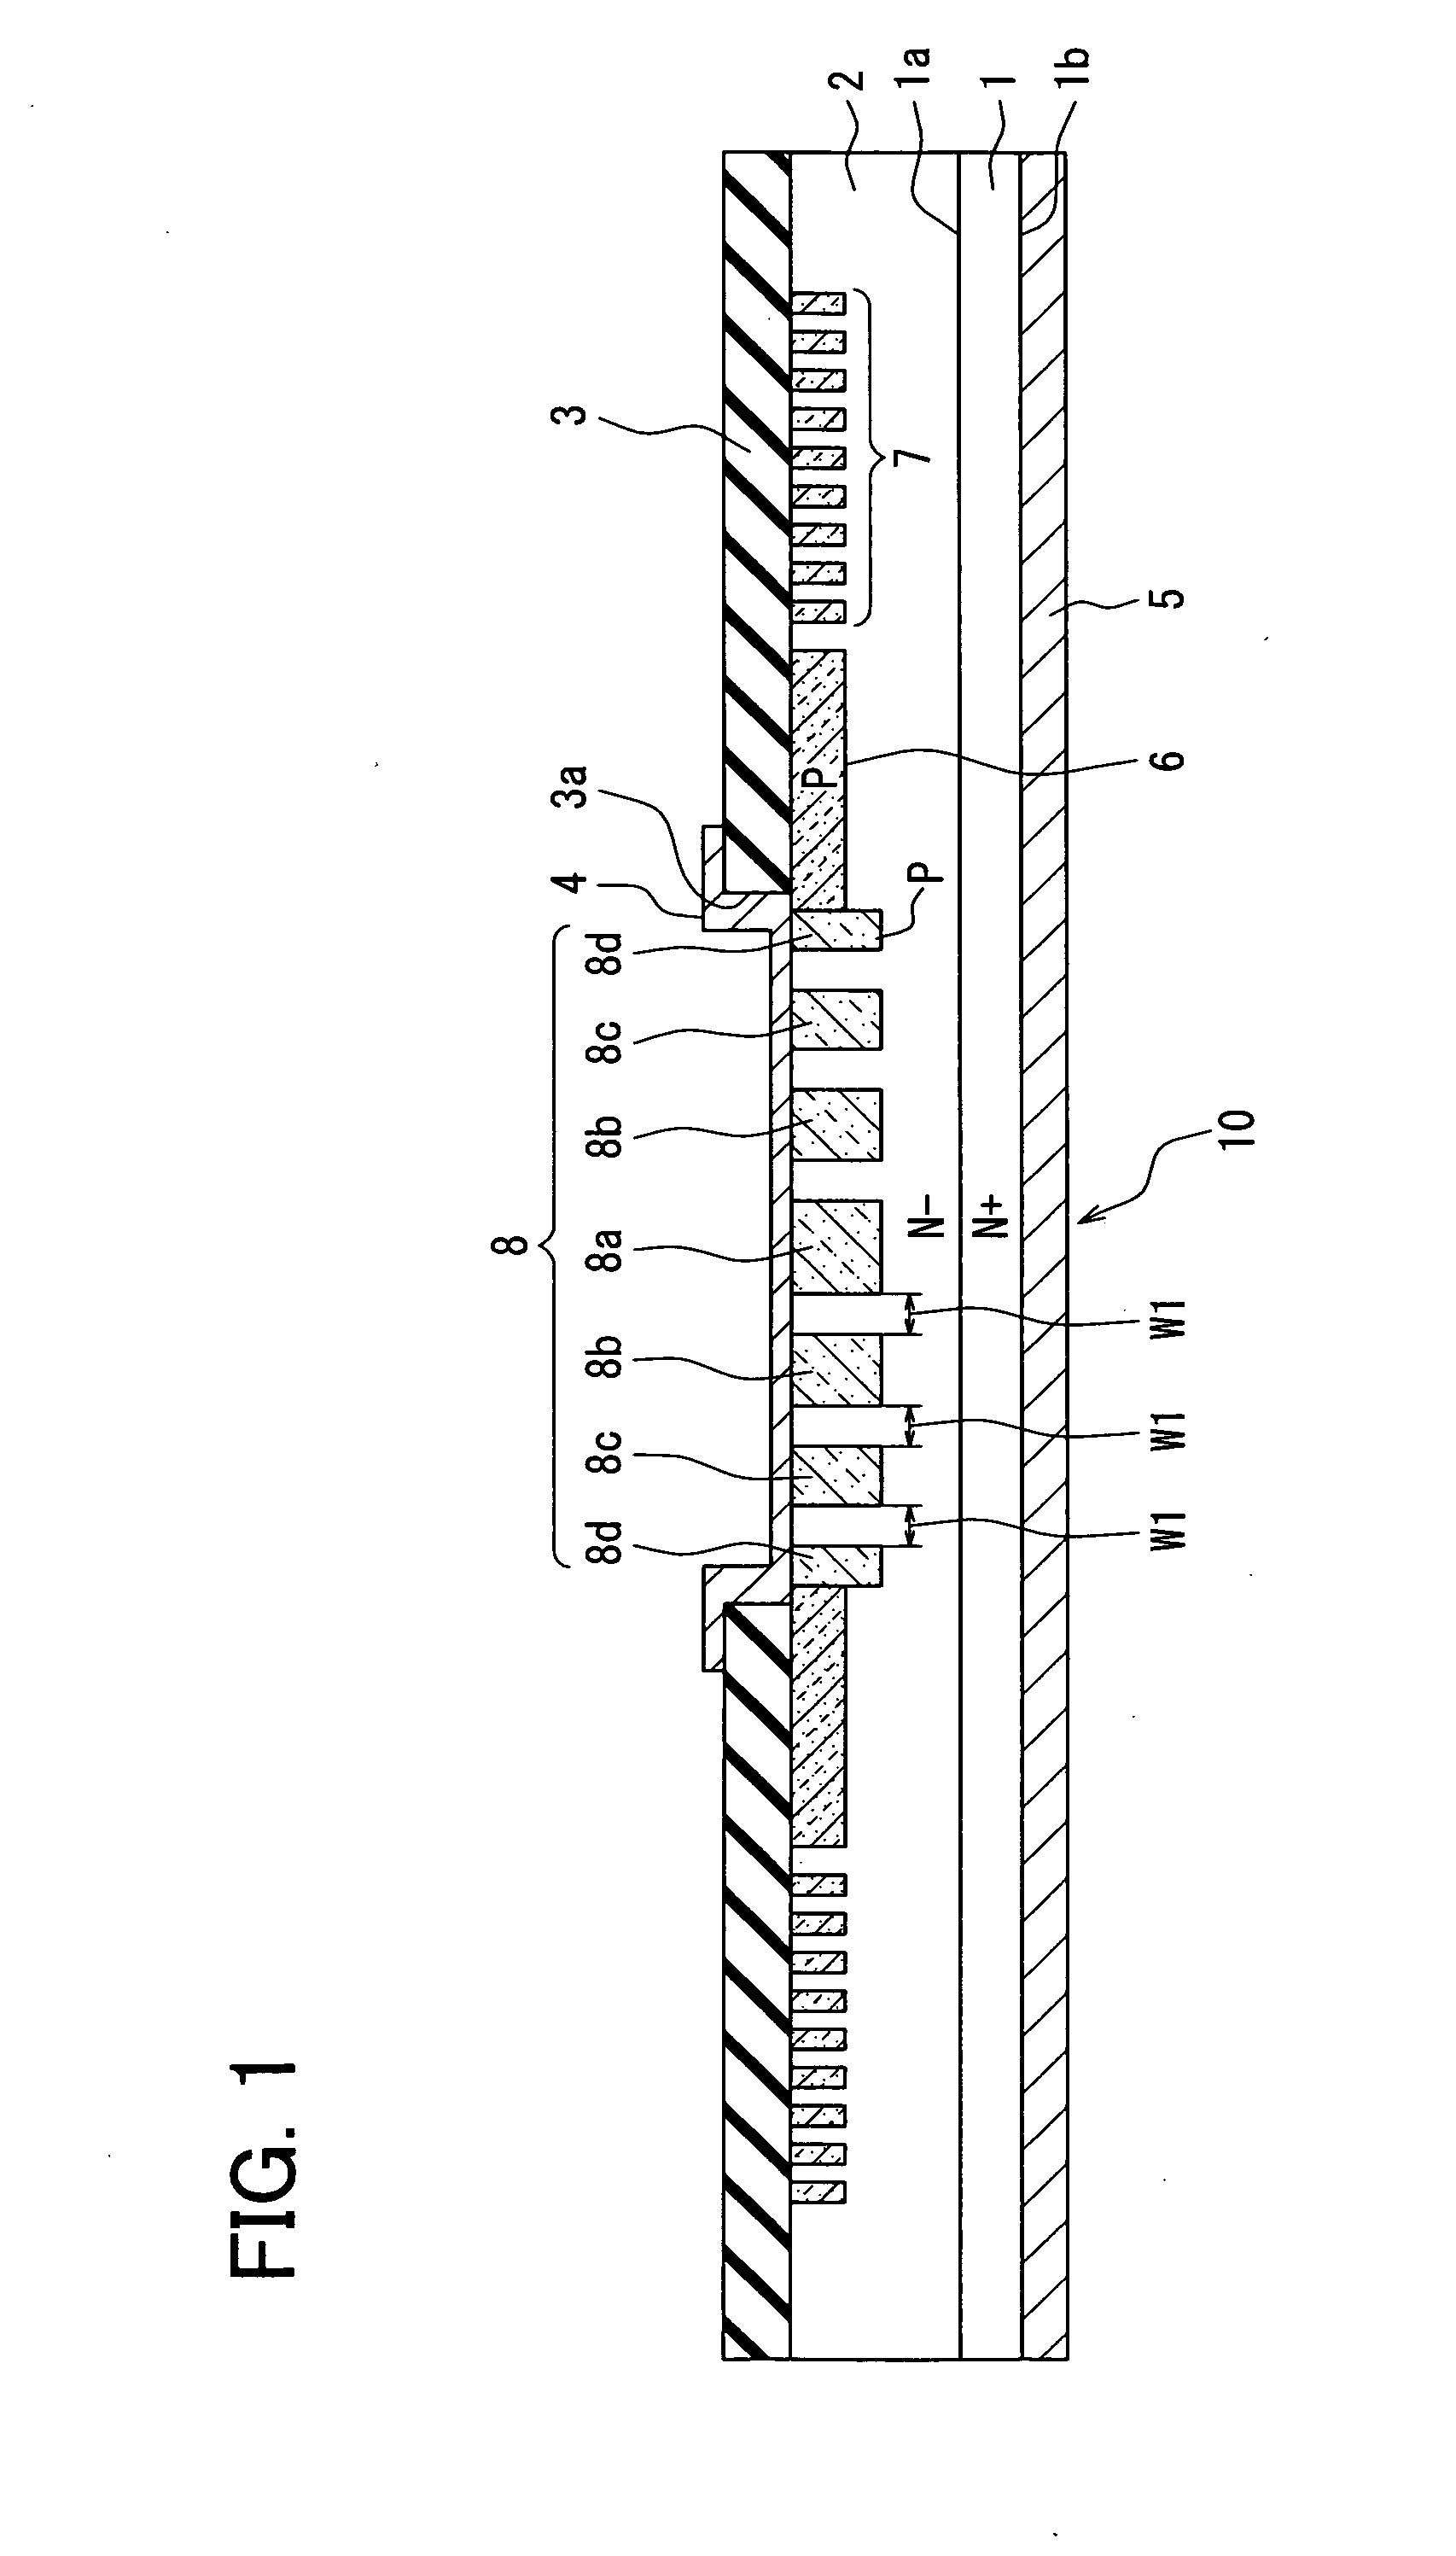 Silicon carbide semiconductor device having junction barrier schottky diode